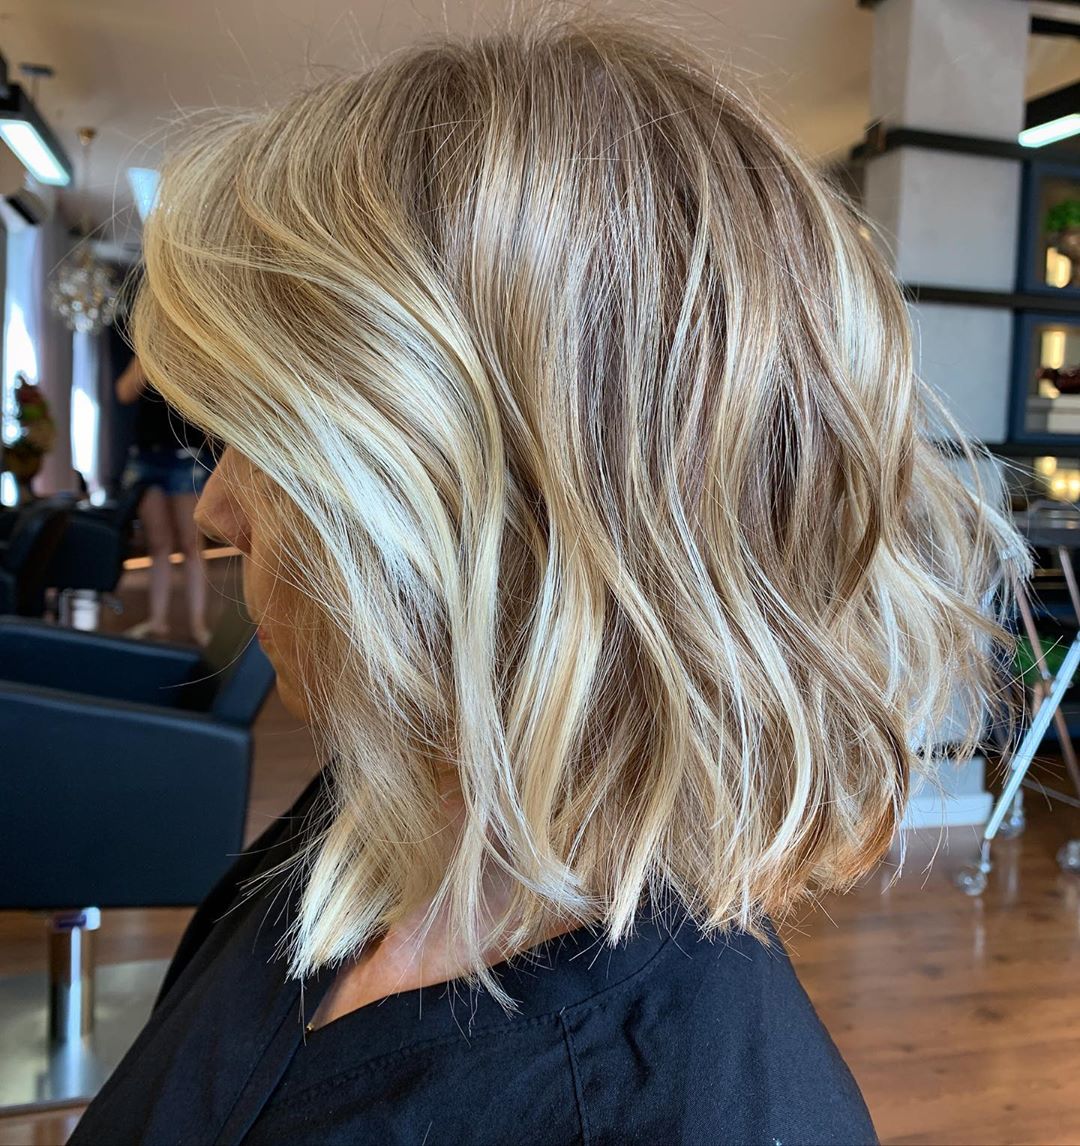 20 Short Hair Color Ideas for A Change-Up in 2020